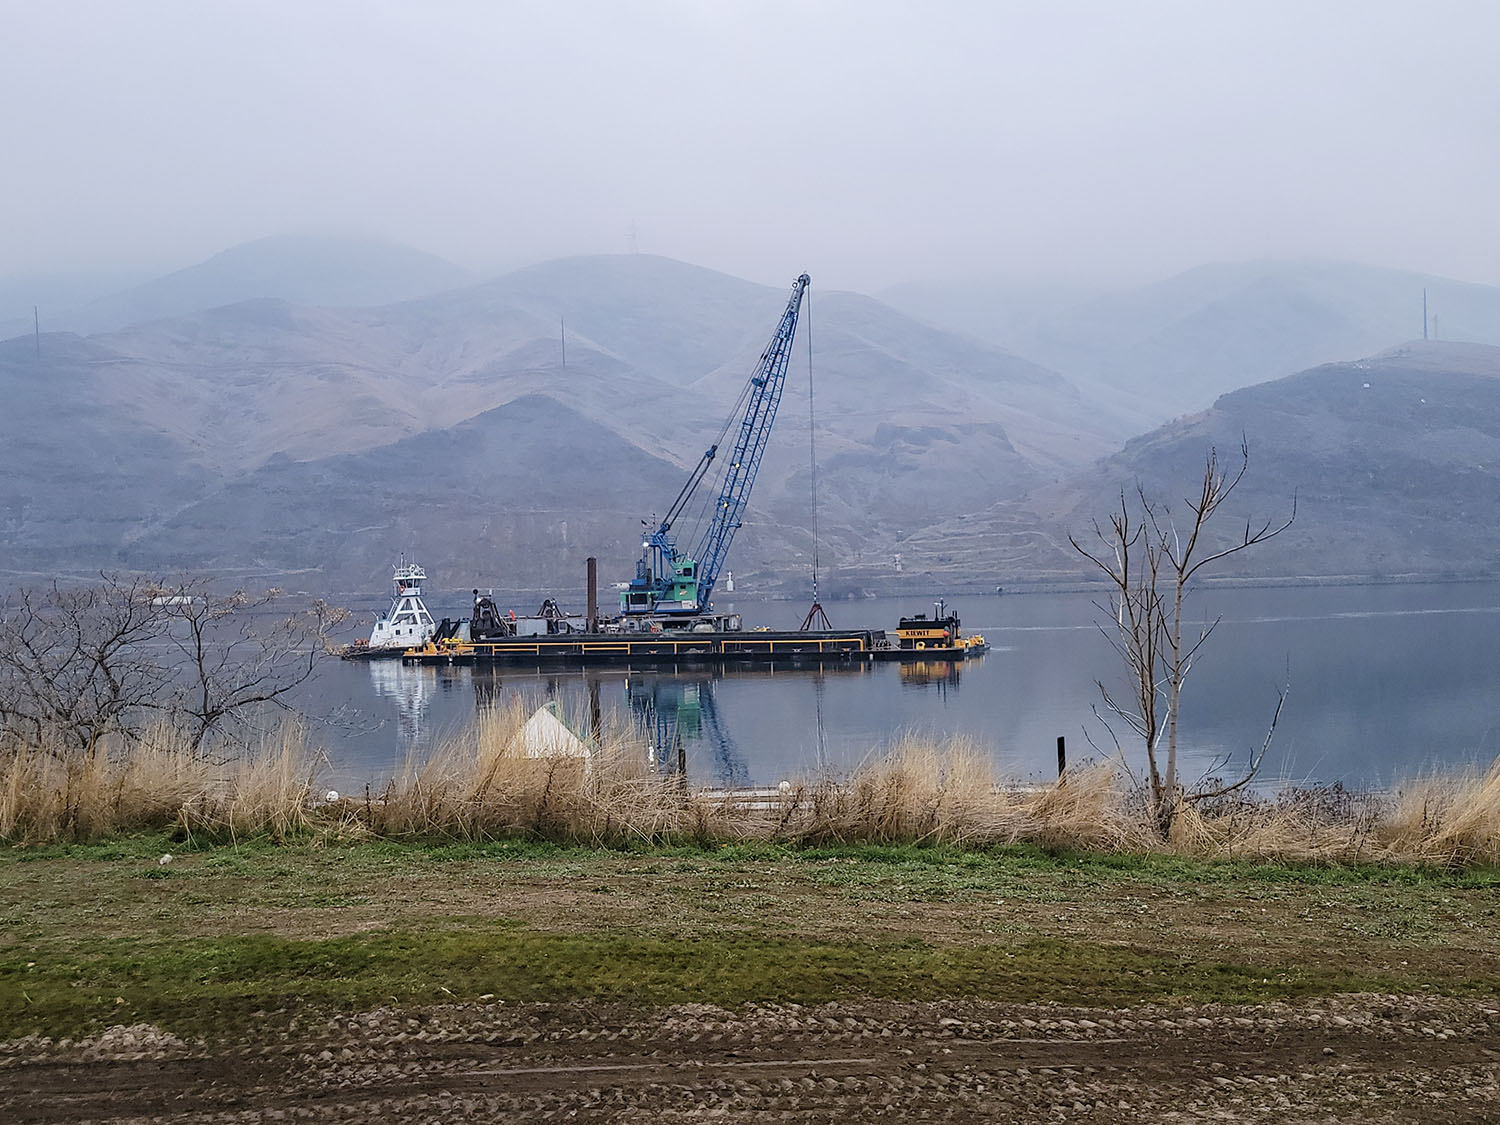 The project dredged about 220,000 cubic yards of material from the channel near the confluence of the Snake and Clearwater rivers. (Photo courtesy of U.S. Army Corps of Engineers)